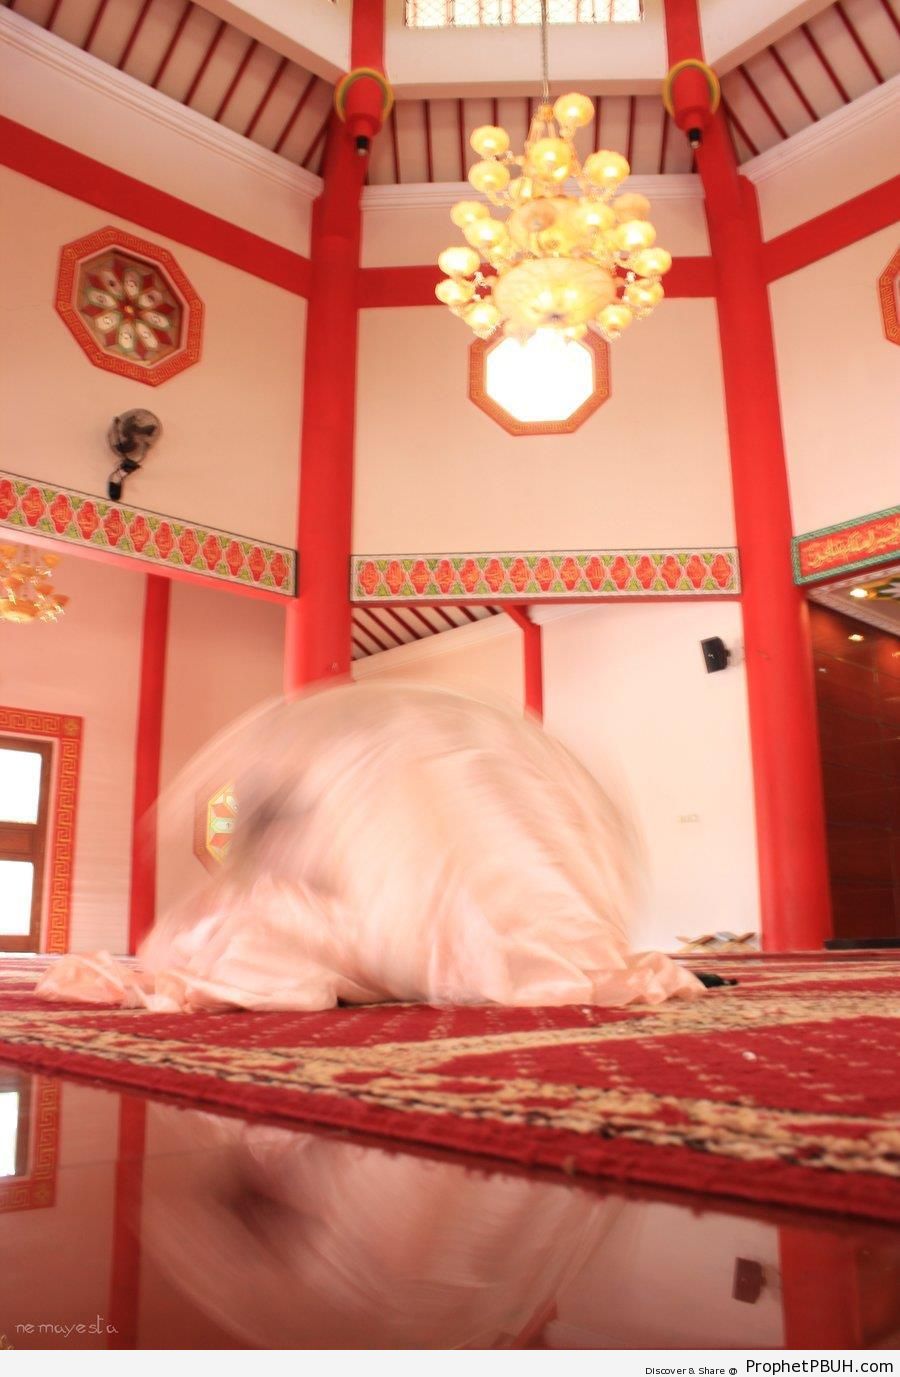 Muslim Bride in Prostration to God at Mosque Prayer Hall - Islamic Architecture -Picture